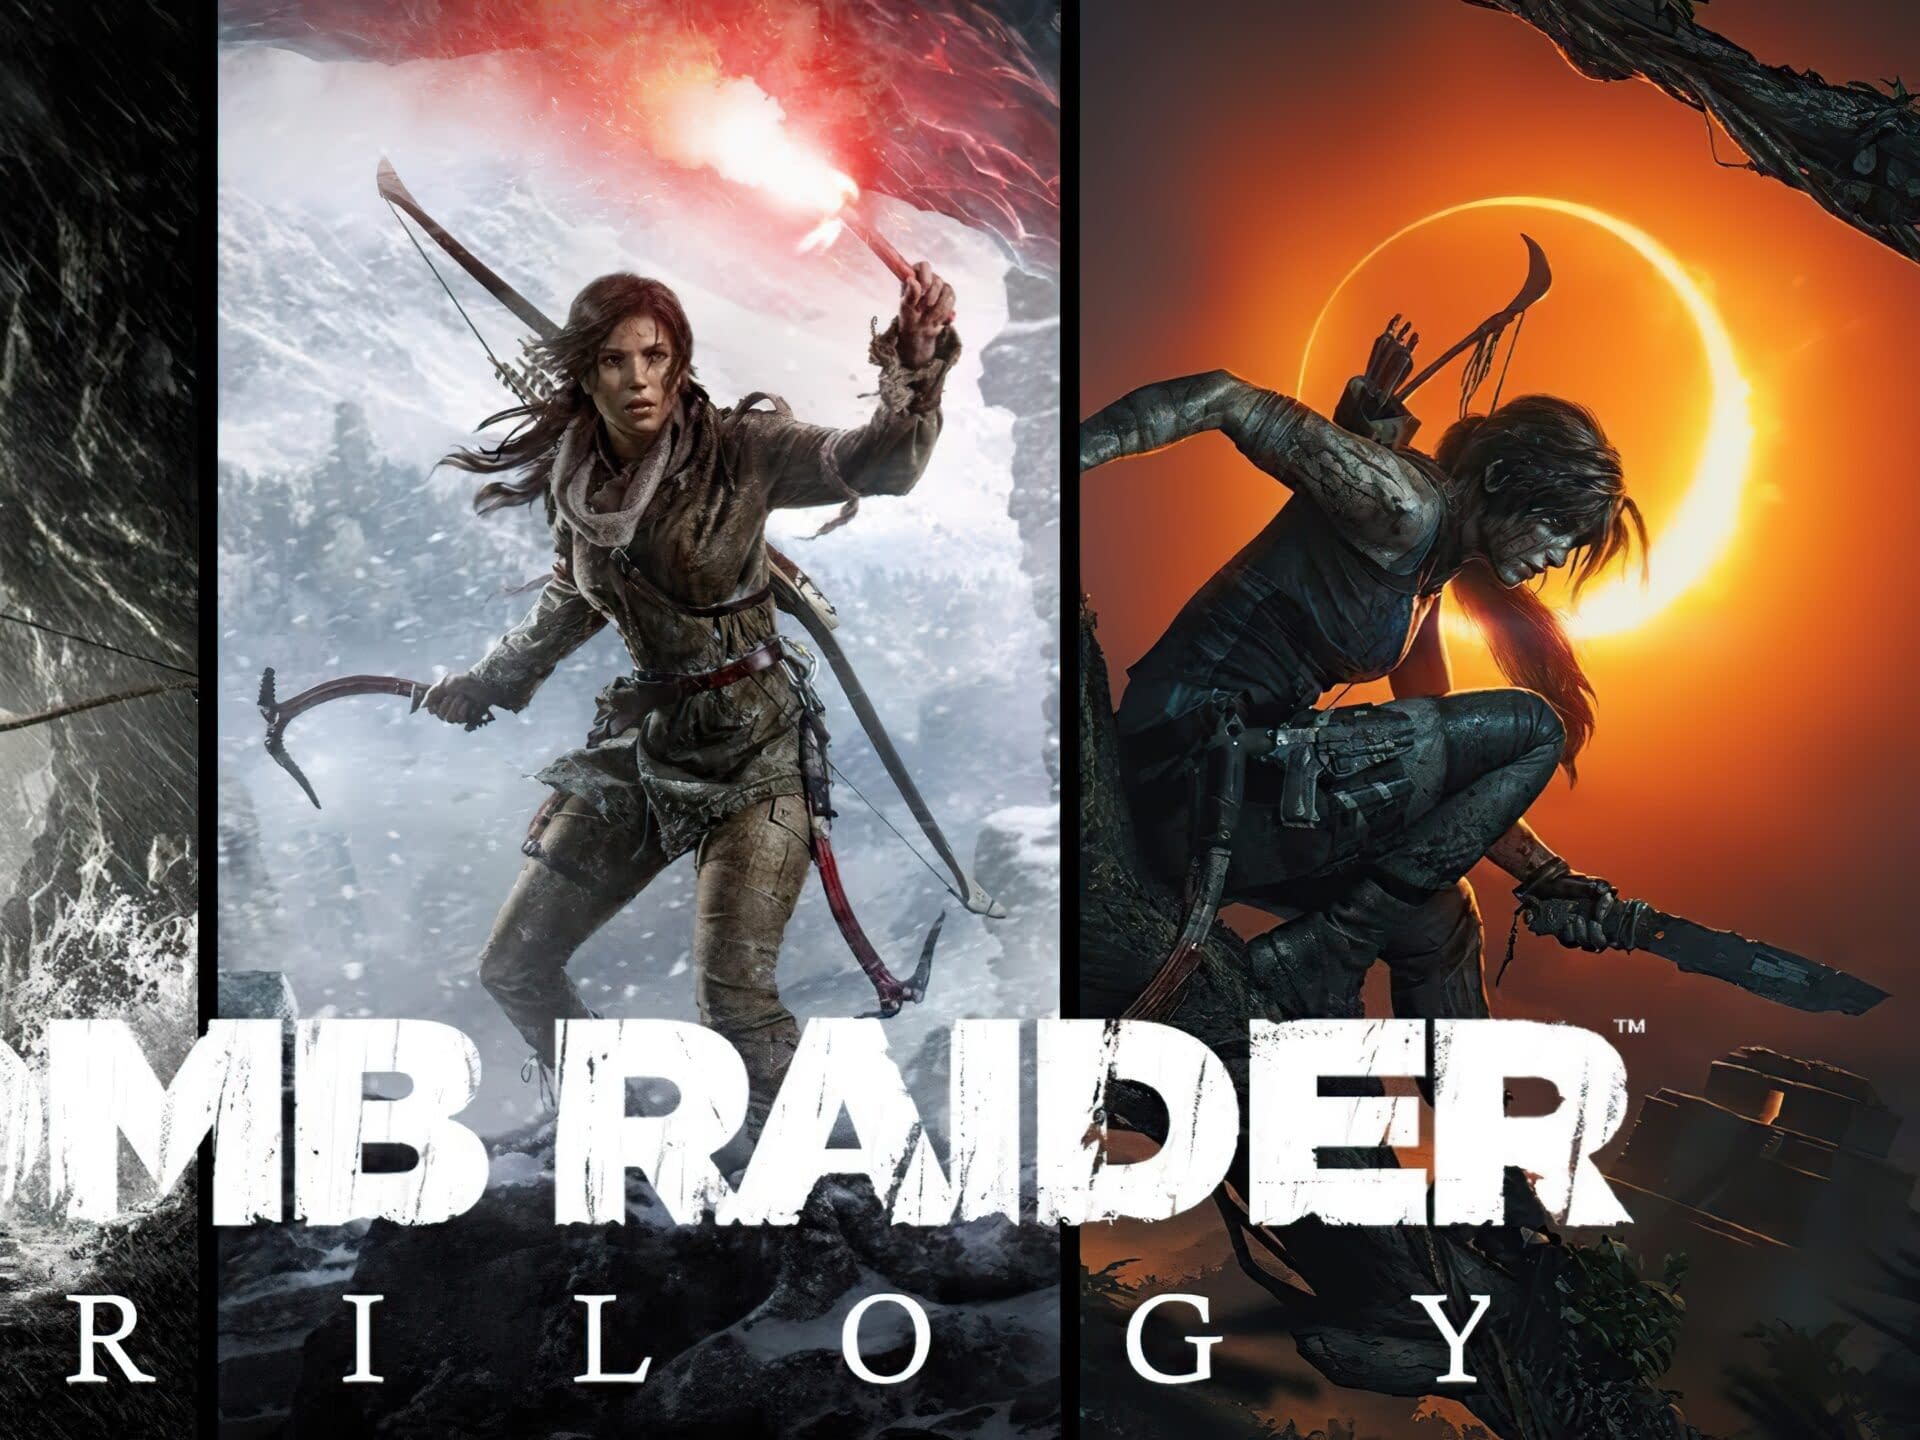 Up to 89 percent discount on the Tomb Raider series on Steam!